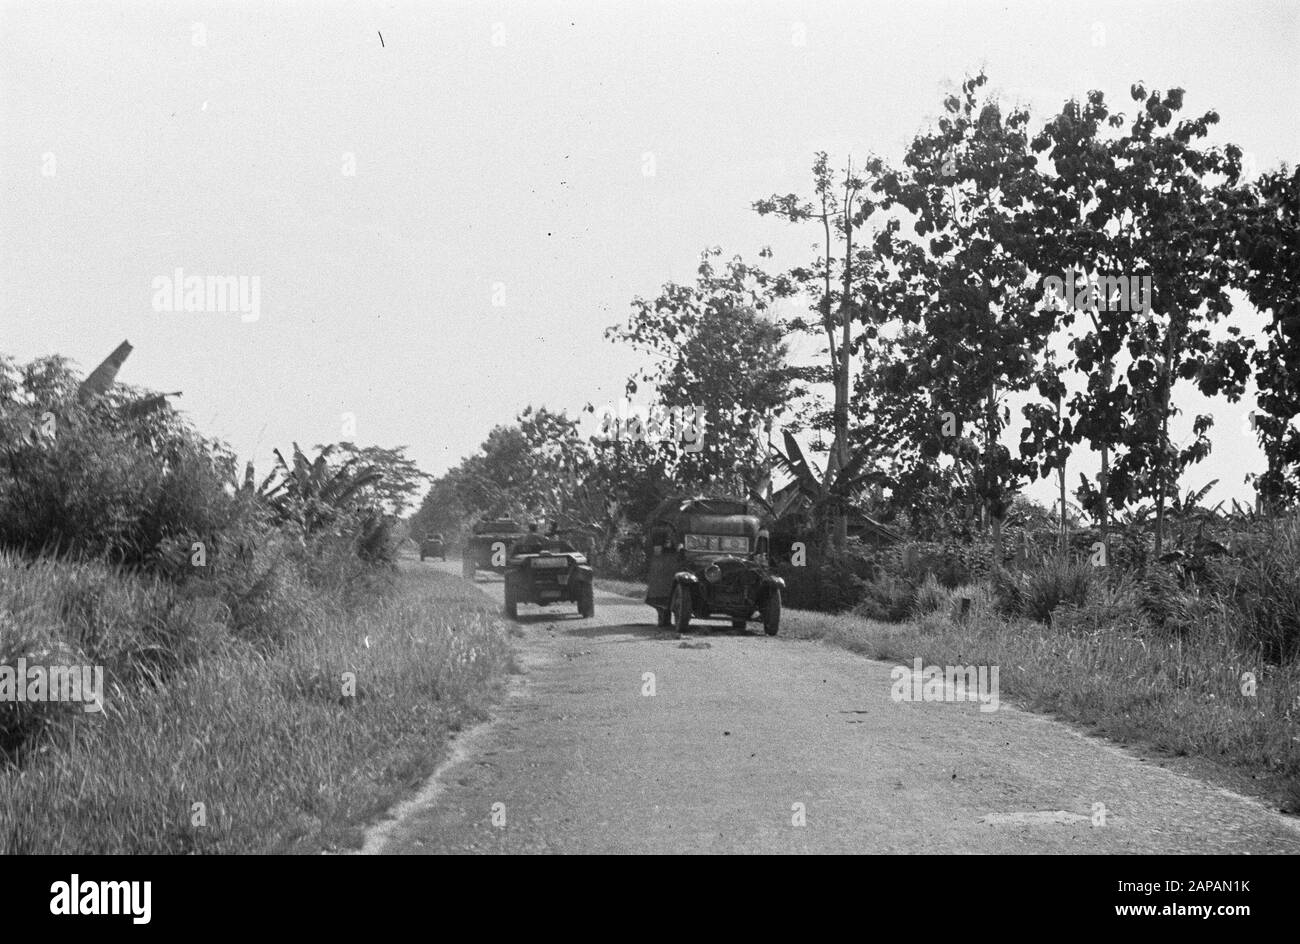 Loeboek Pakem en Baoengan Description: Collection Photo collection Service for Army Contacts Indonesia, photon number 7550 Date: 29 July 1948 Location: Indonesia, Dutch East Indies, Sumatra Stock Photo